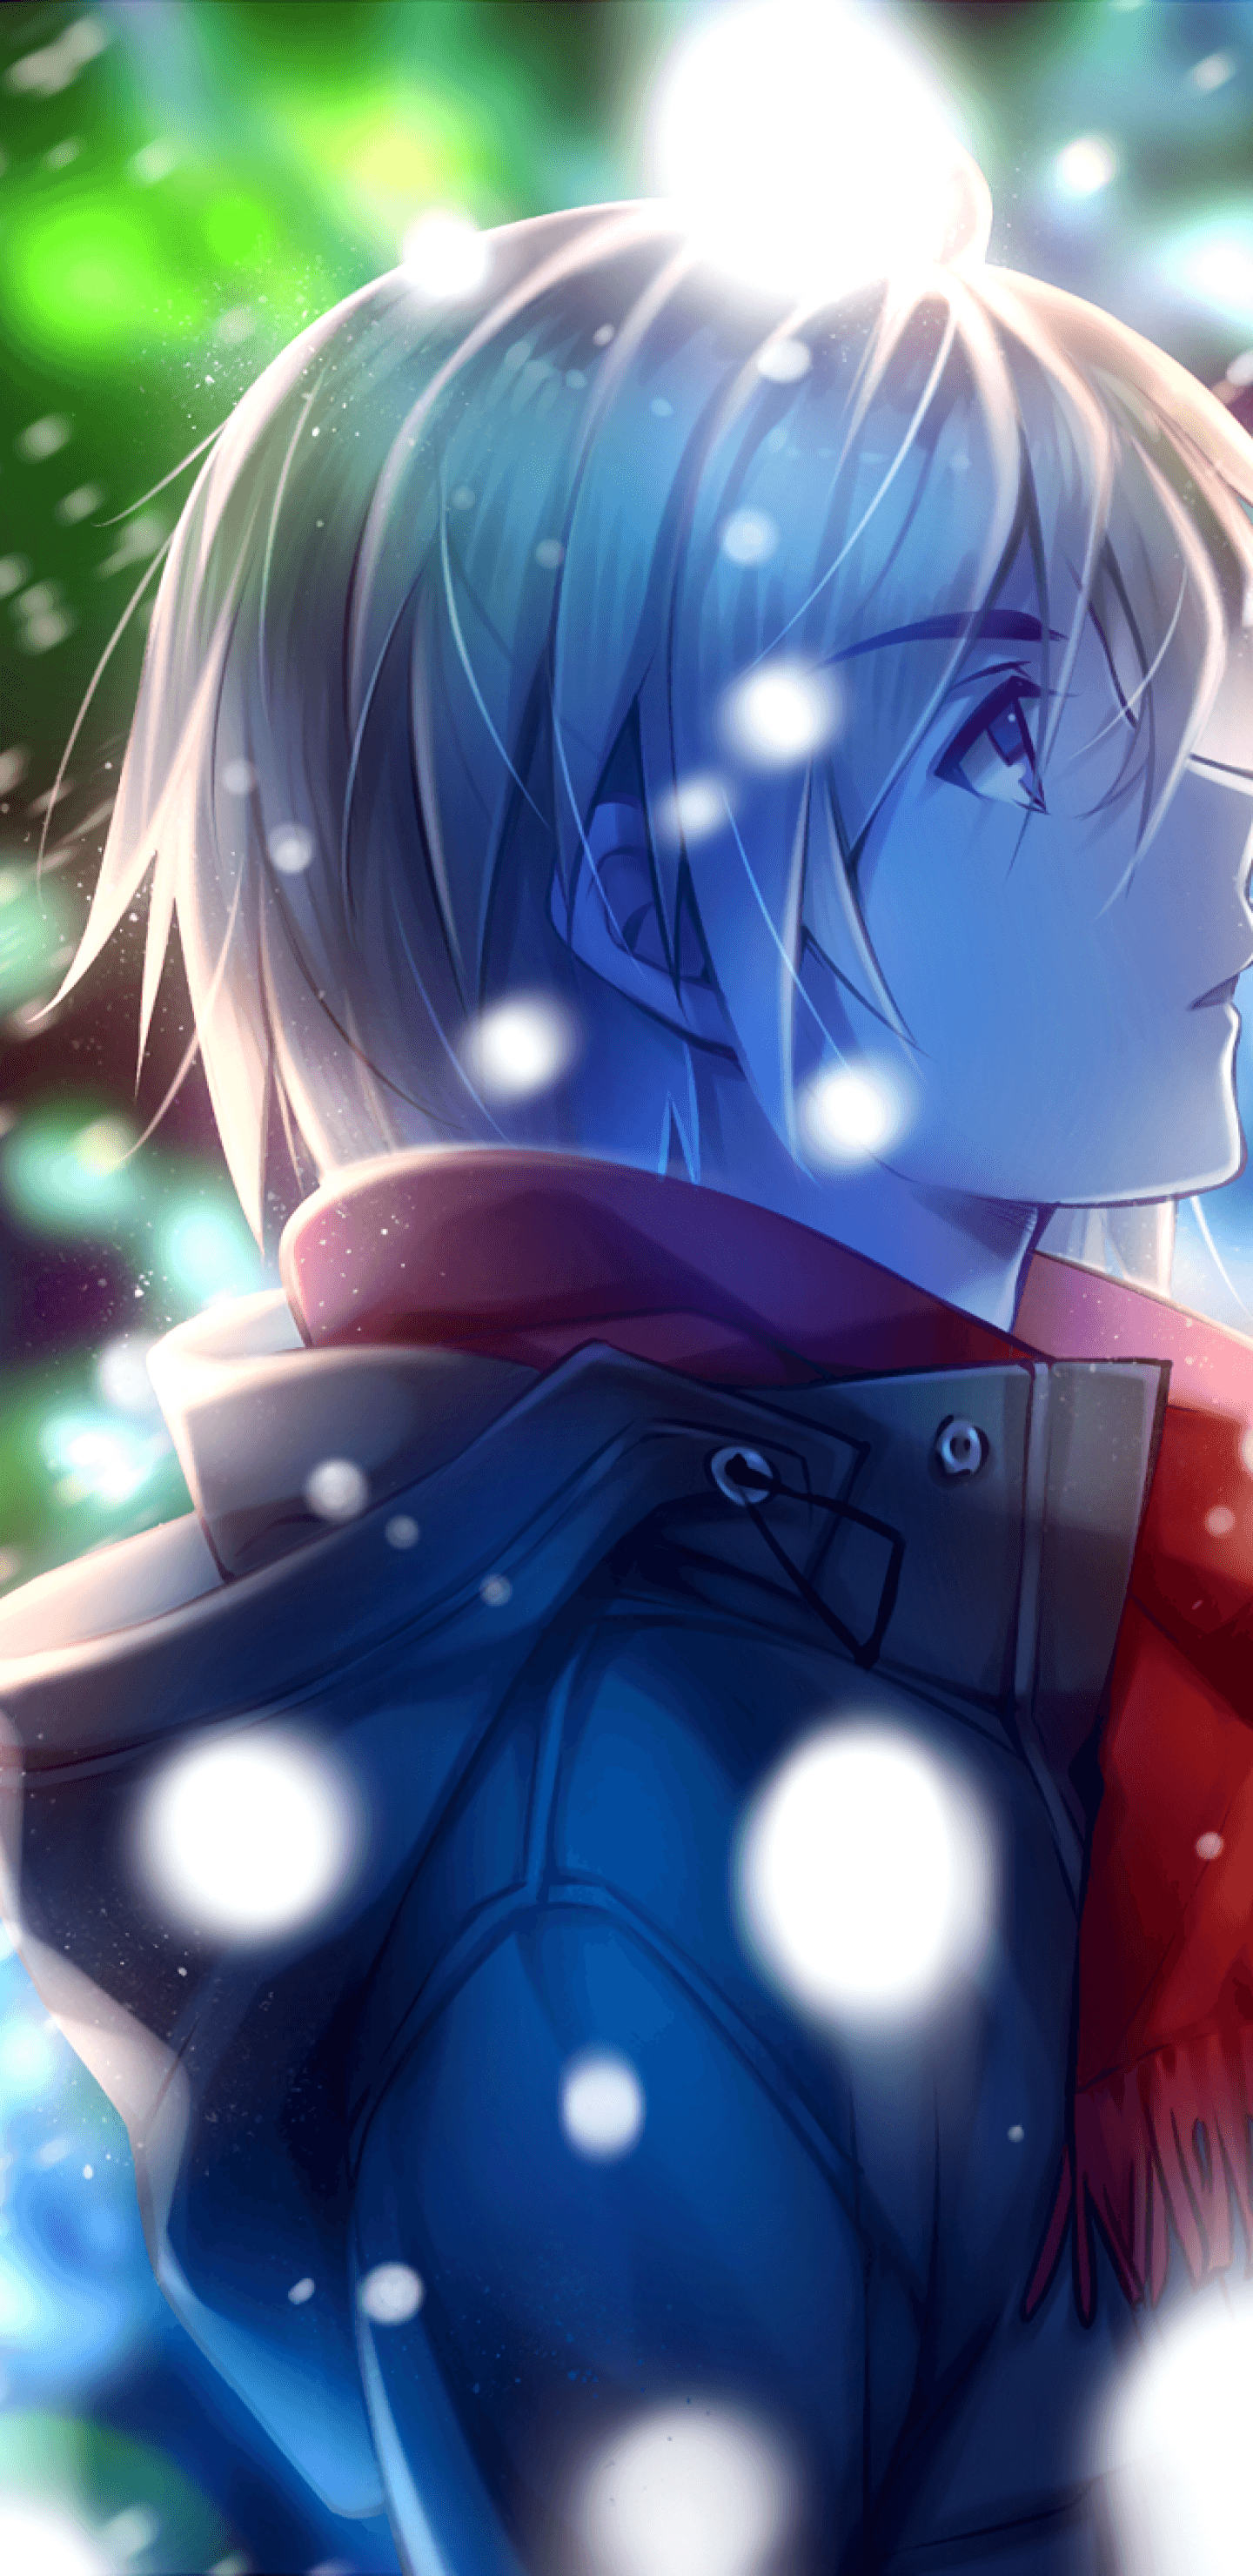 Download 1440x2960 Anime Boy, Profile View, Red Scarf, Winter